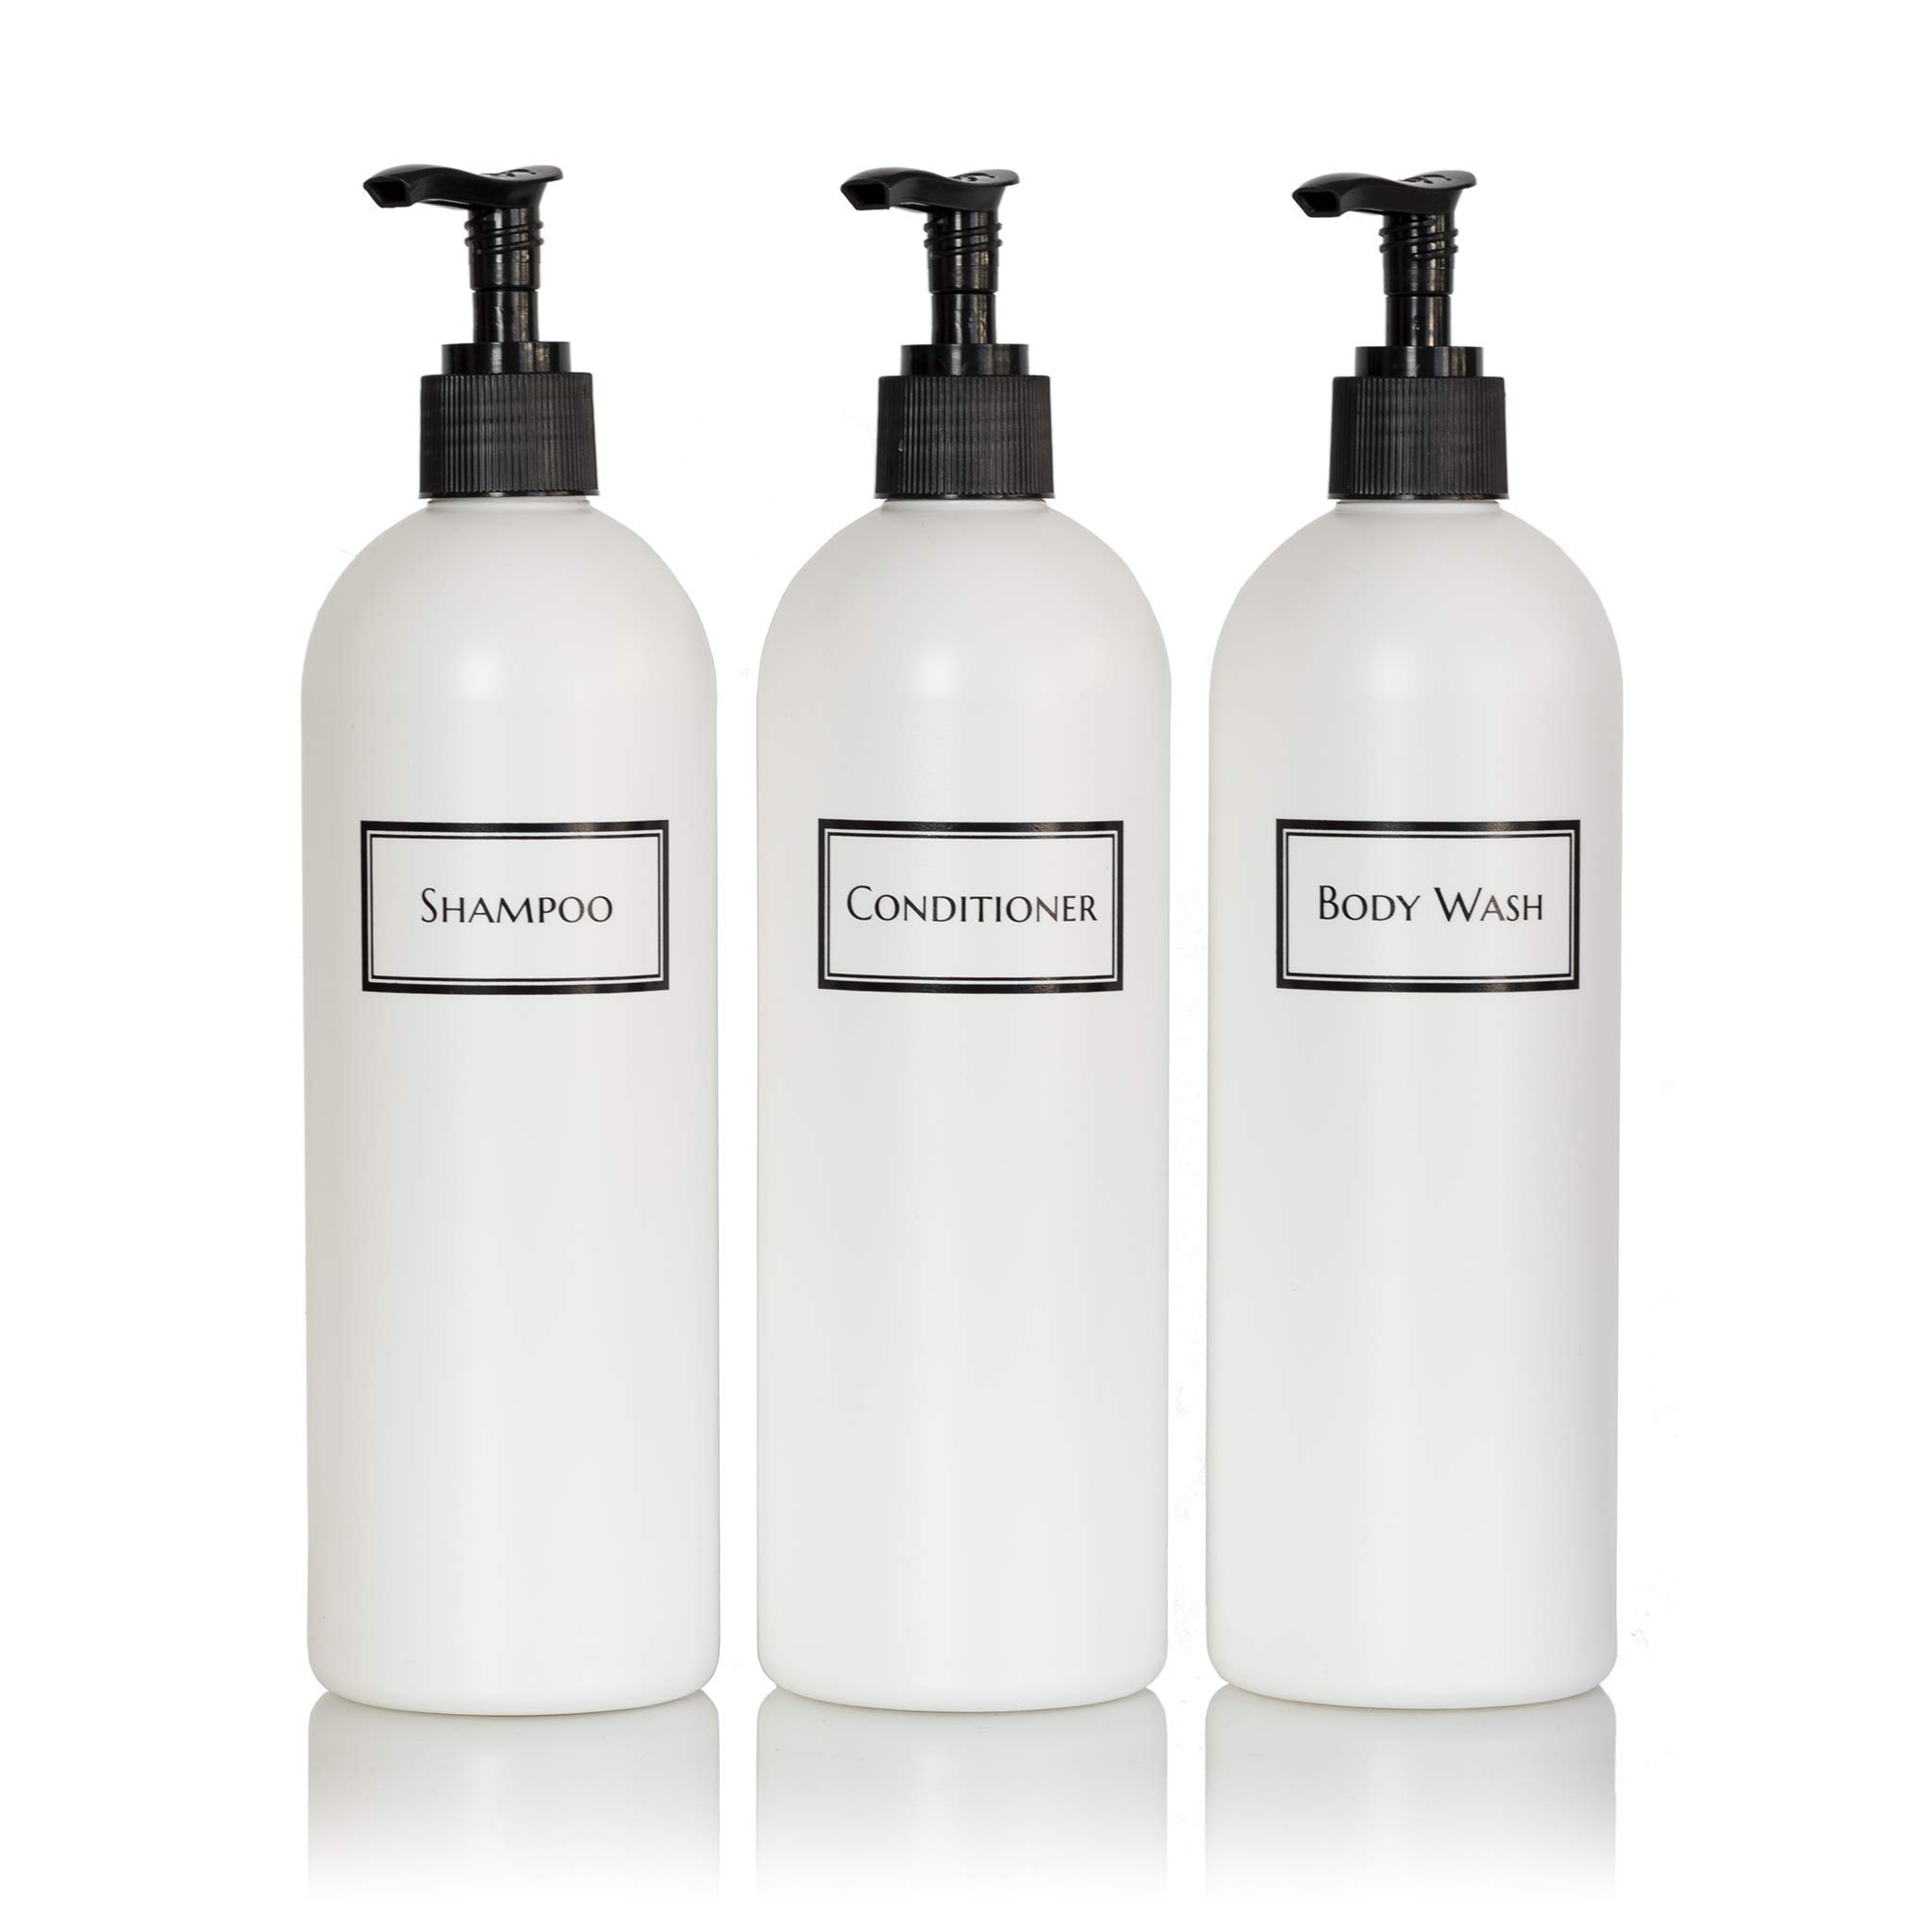  Shower Containers For Shampoo